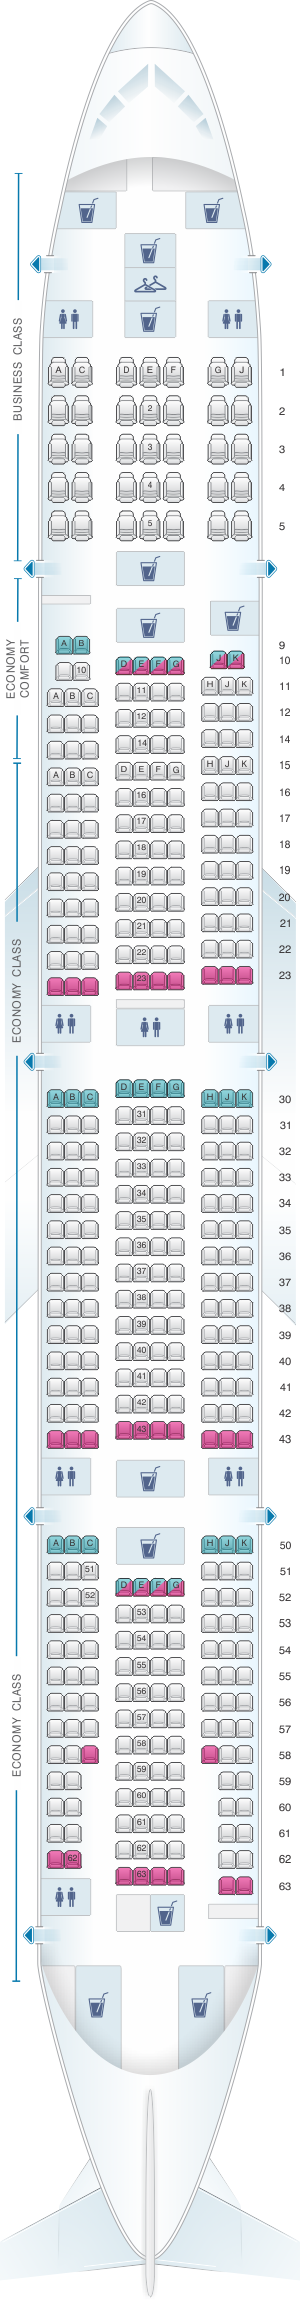 Seat map for KLM Boeing B777 300ER